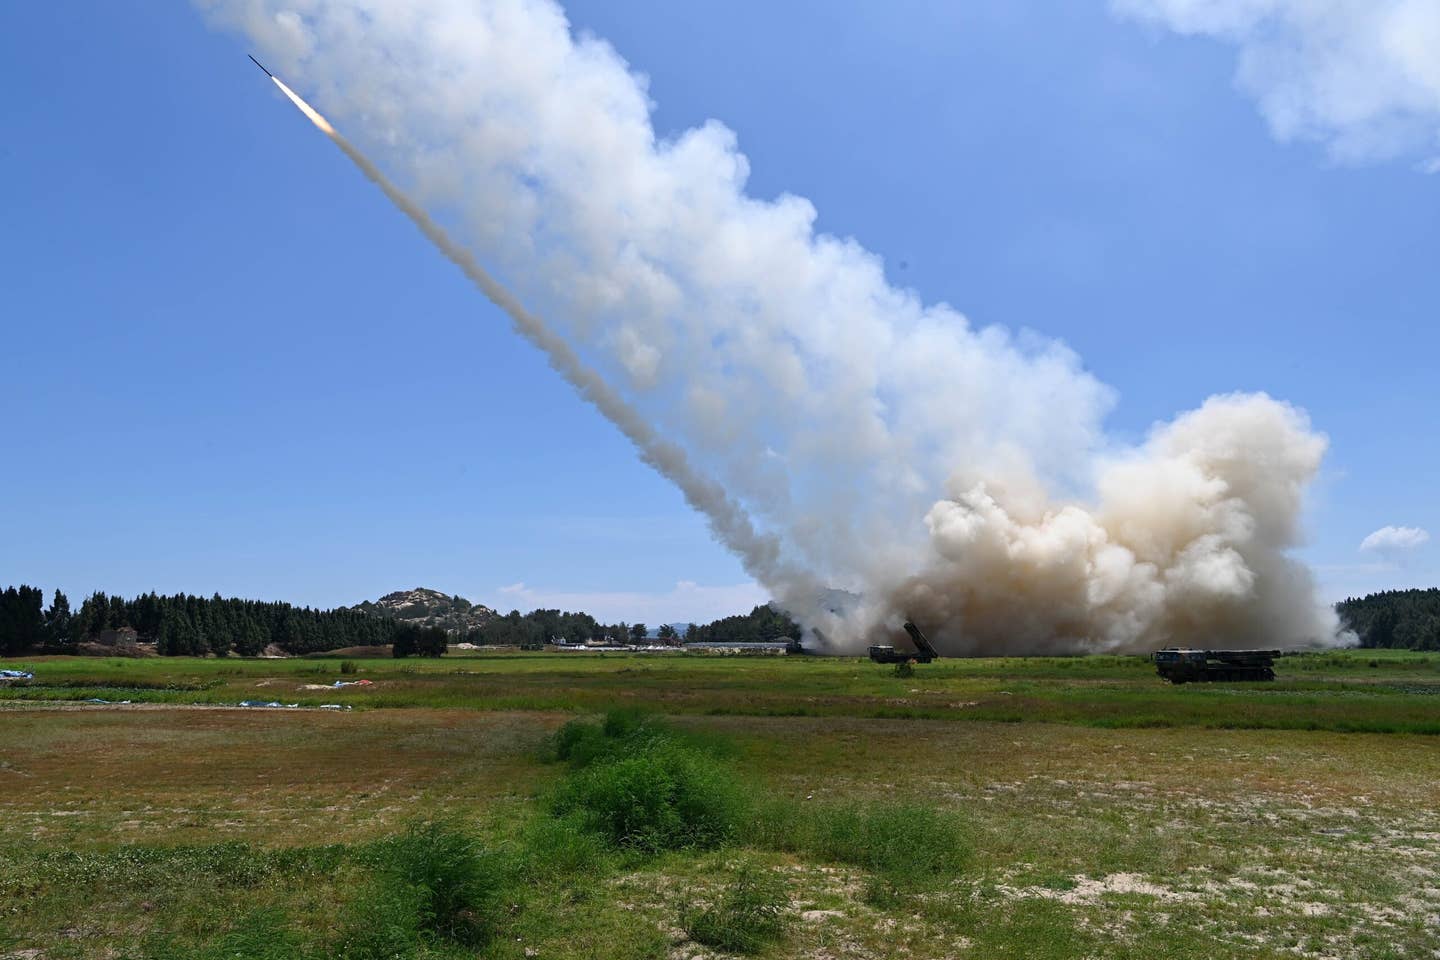 Rocket artillery units from the Eastern Theater Command of the Chinese PLA conduct long-range live-fire drills close to the Taiwan Strait, on August 4, 2022. <em>Photo by Lai Qiaoquan/Xinhua via Getty Images</em>